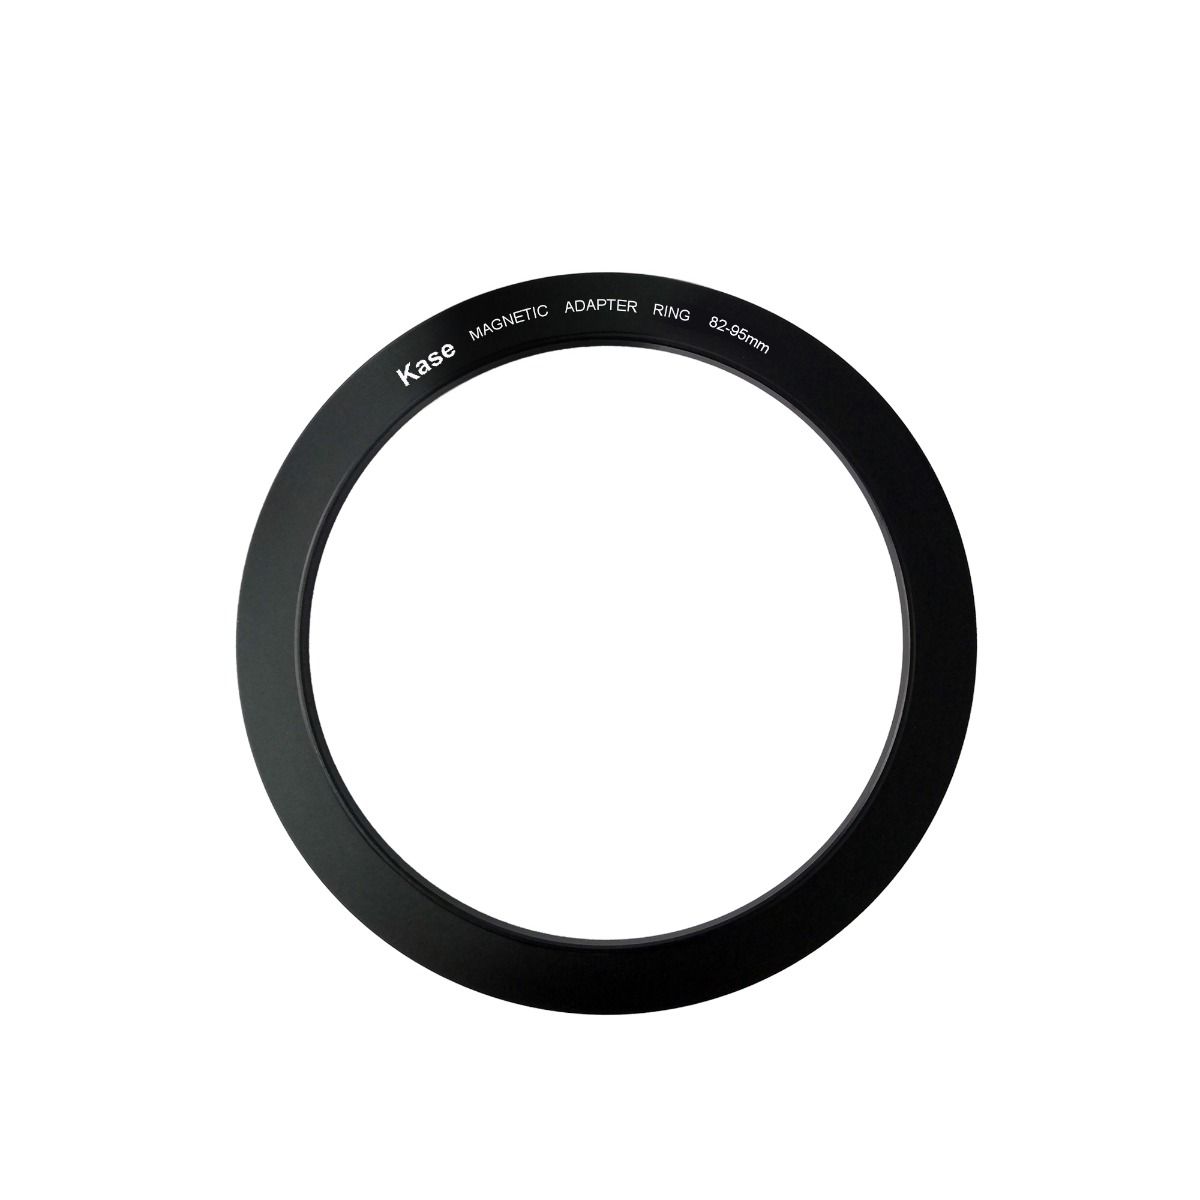 Product Image of Kase 82-95mm magnetic circular step up ring